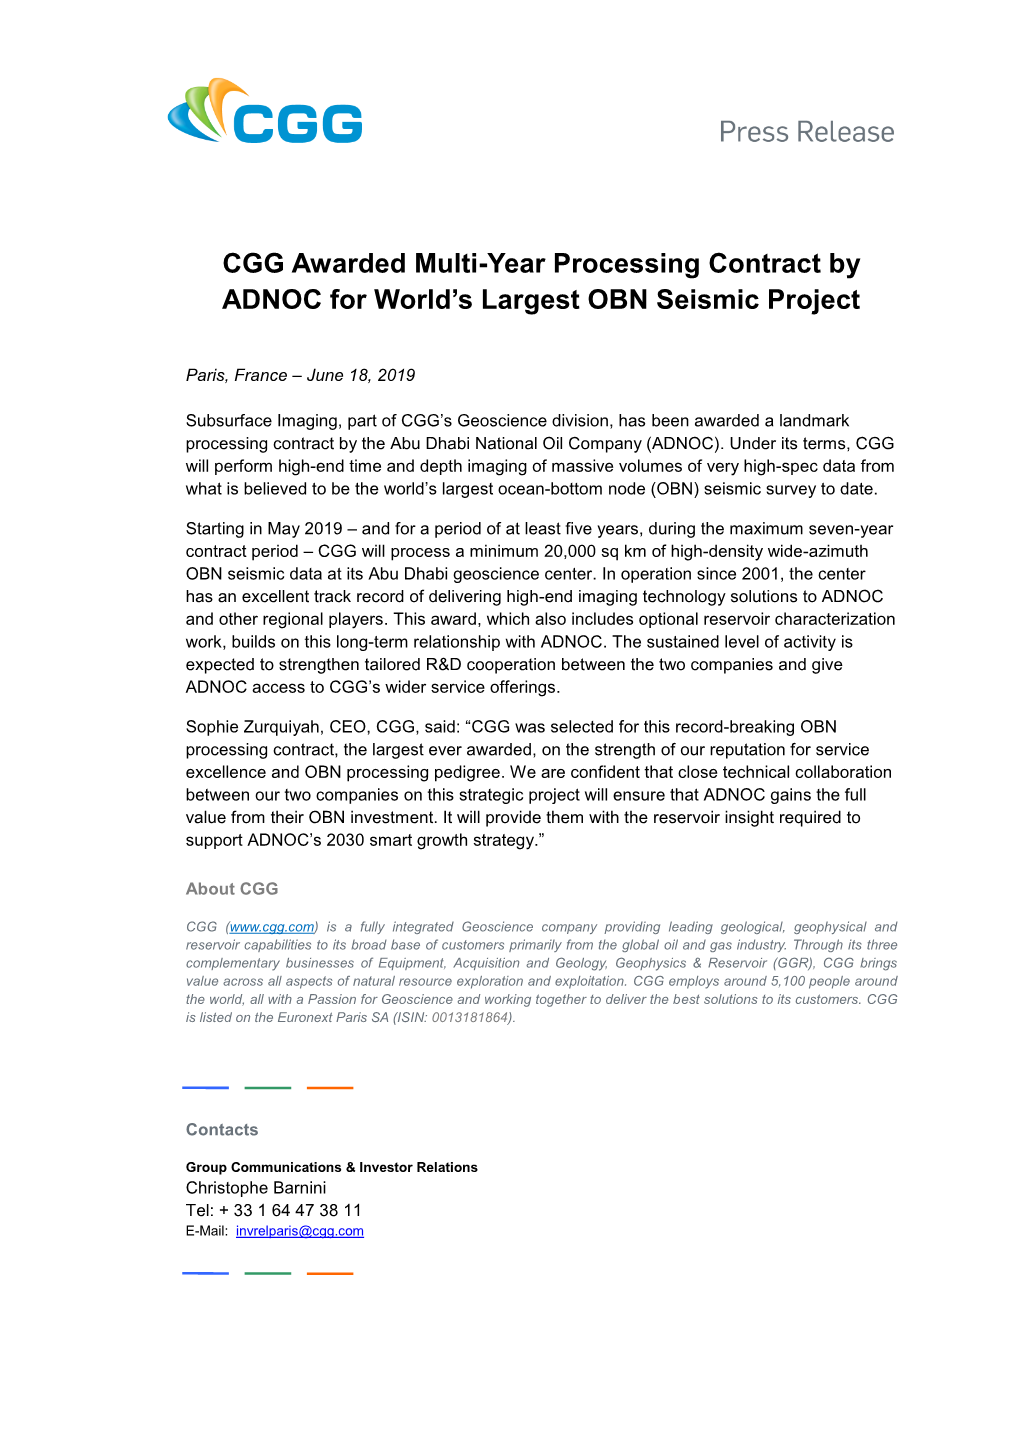 CGG Awarded Multi-Year Processing Contract by ADNOC for World's